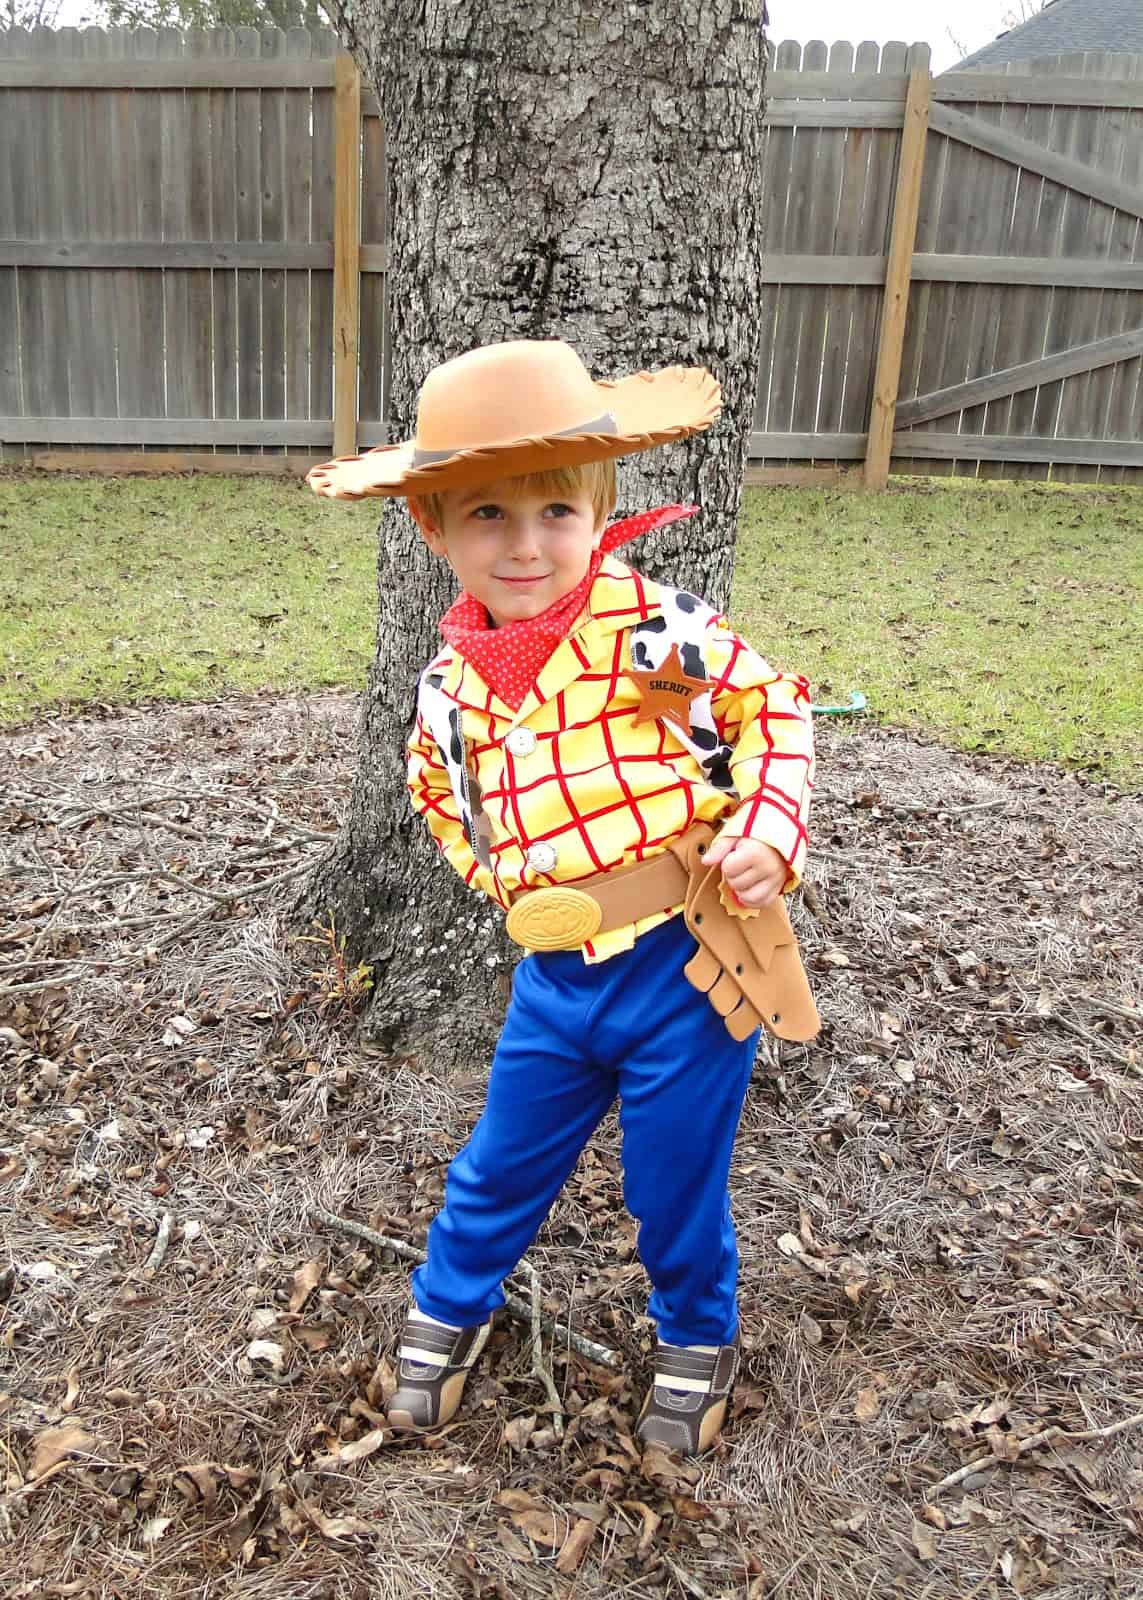 Toy Story Halloween Costumes for Toddlers